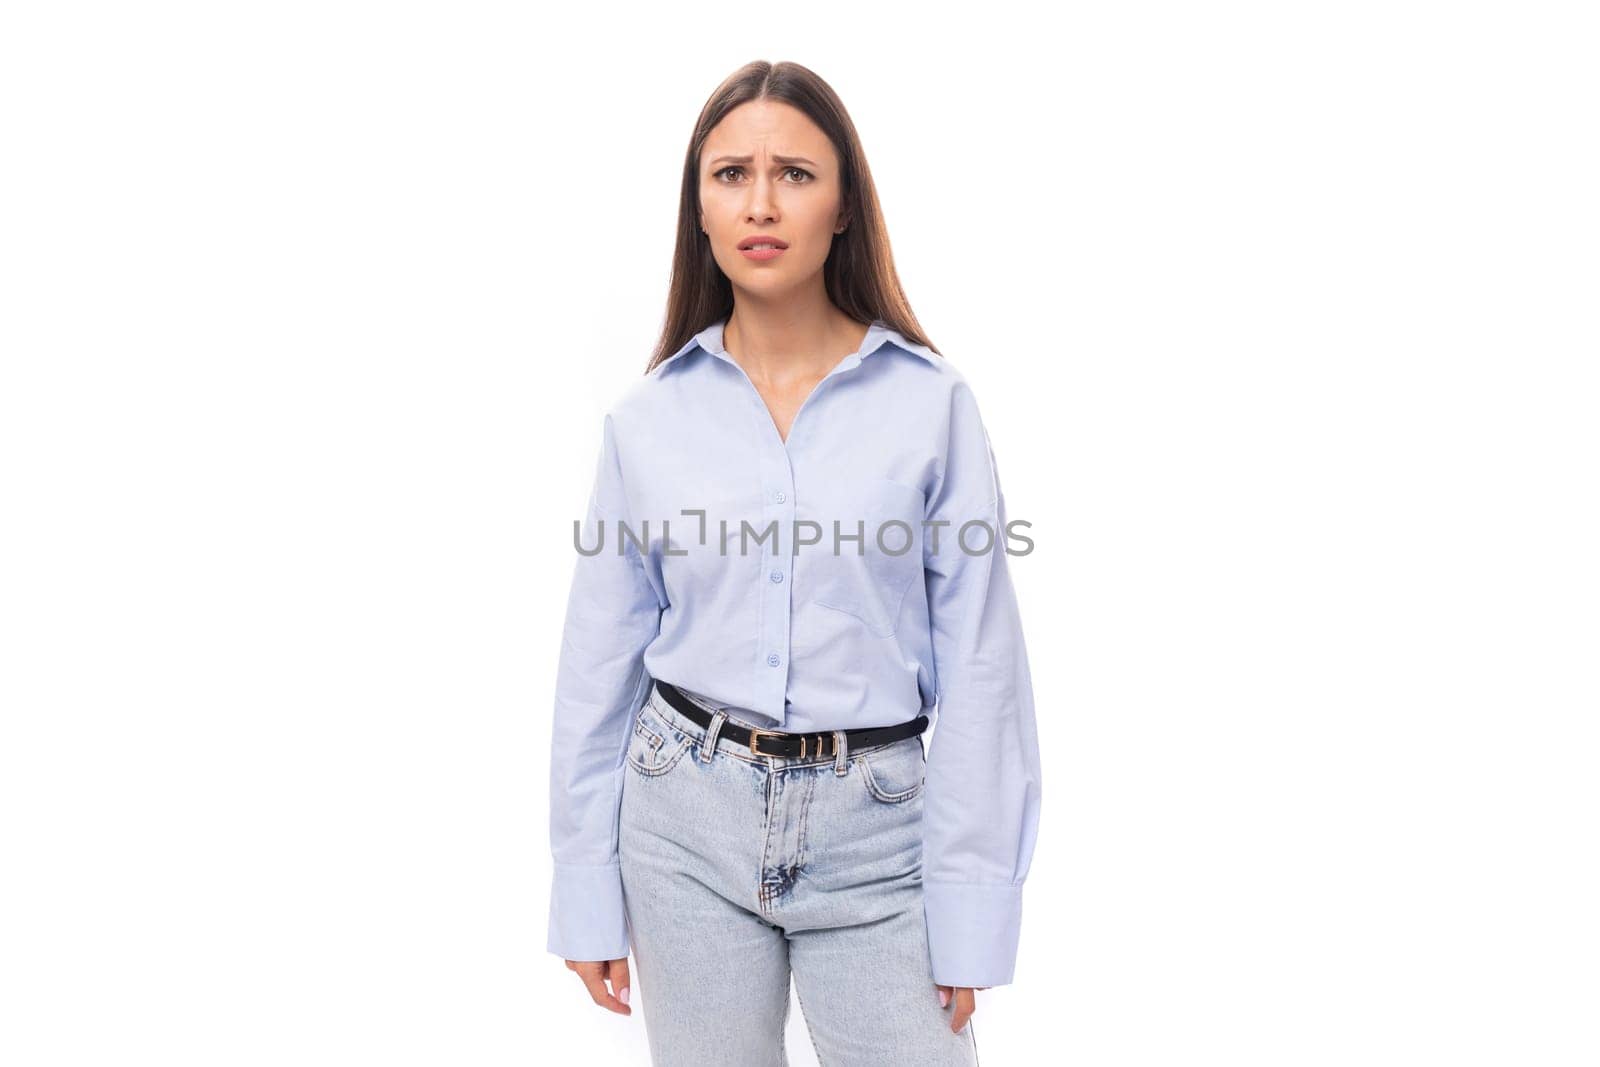 young caucasian model woman with dark straight hair dressed in a blue blouse looks upset at the camera.